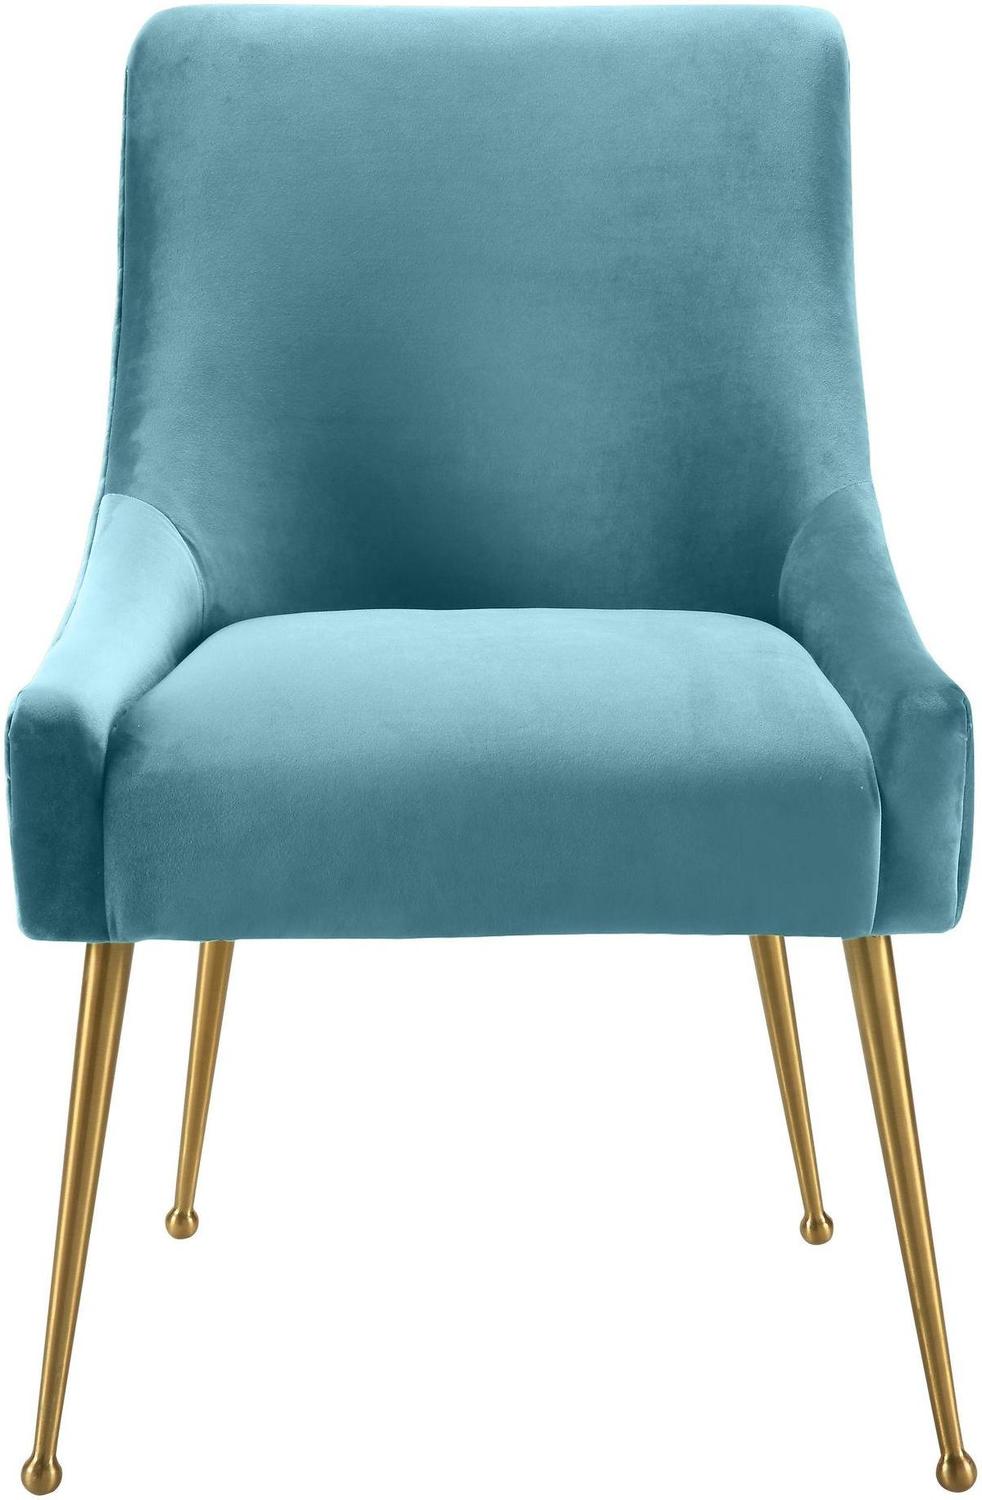 cream and gold accent chair Contemporary Design Furniture Dining Chairs Sea Blue